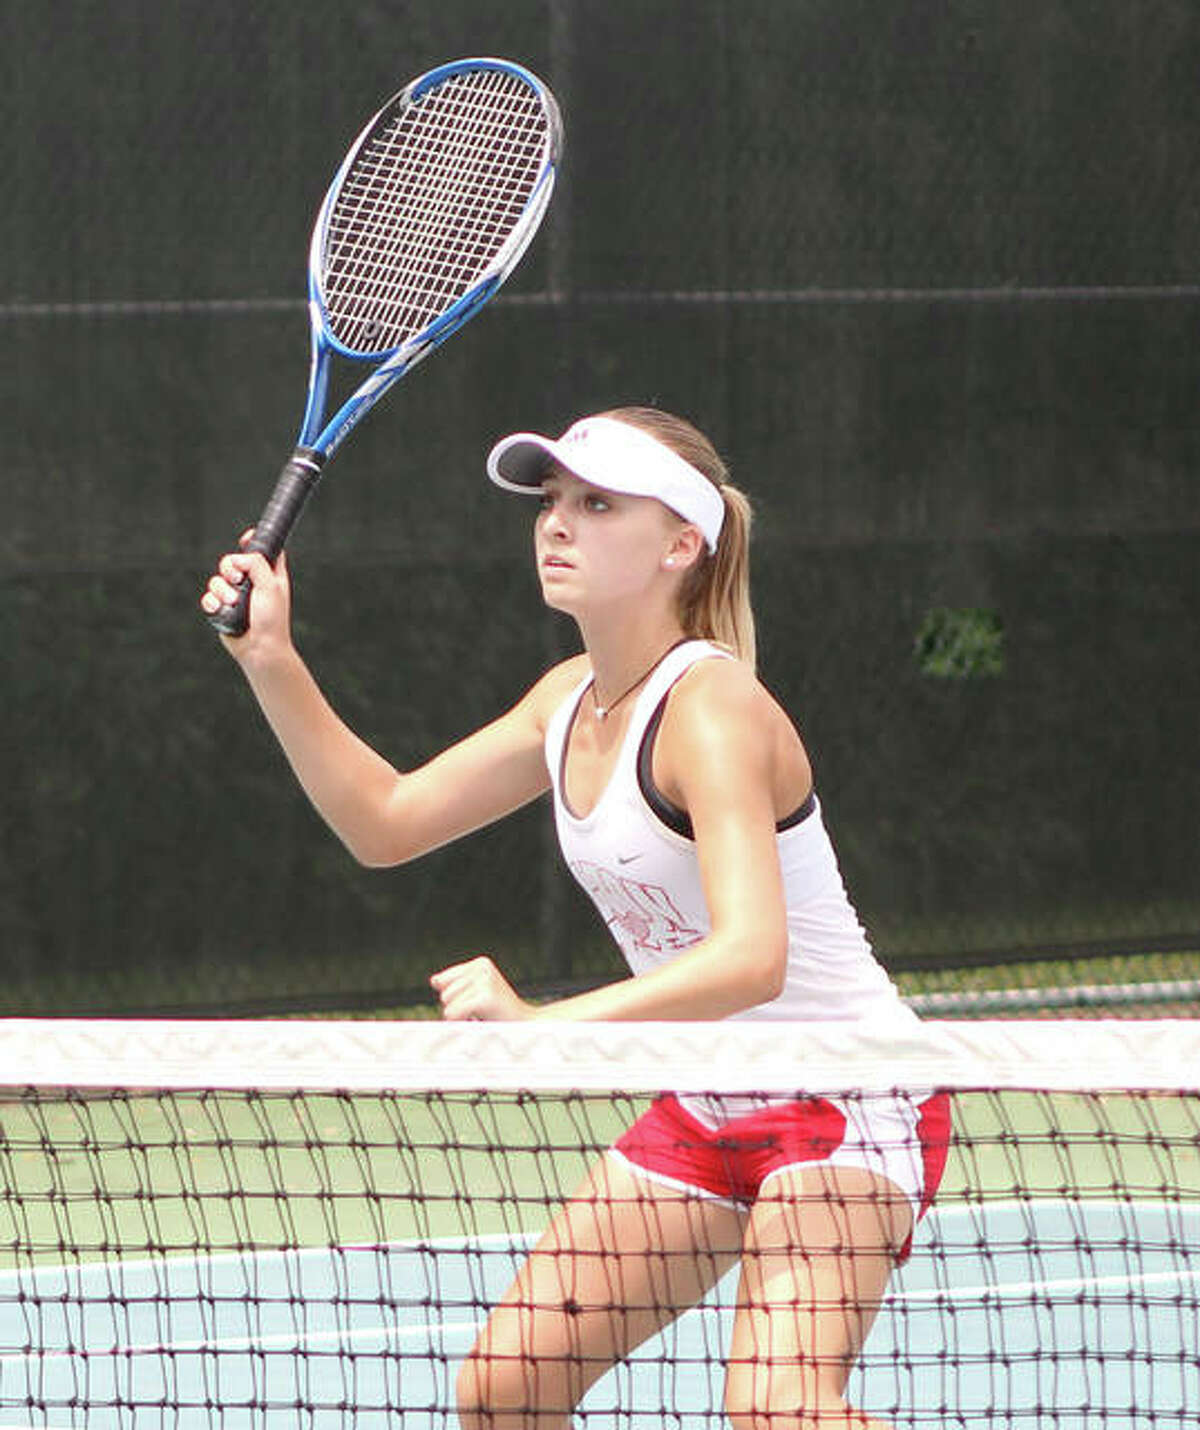 Alton’s Ainsley Fortschneider, shown getting ready for a return at the net in a double match earlier this season, won singles and doubles matches Tuesday in a Redbirds’ win over St. Charles (Mo.) Duchesne.